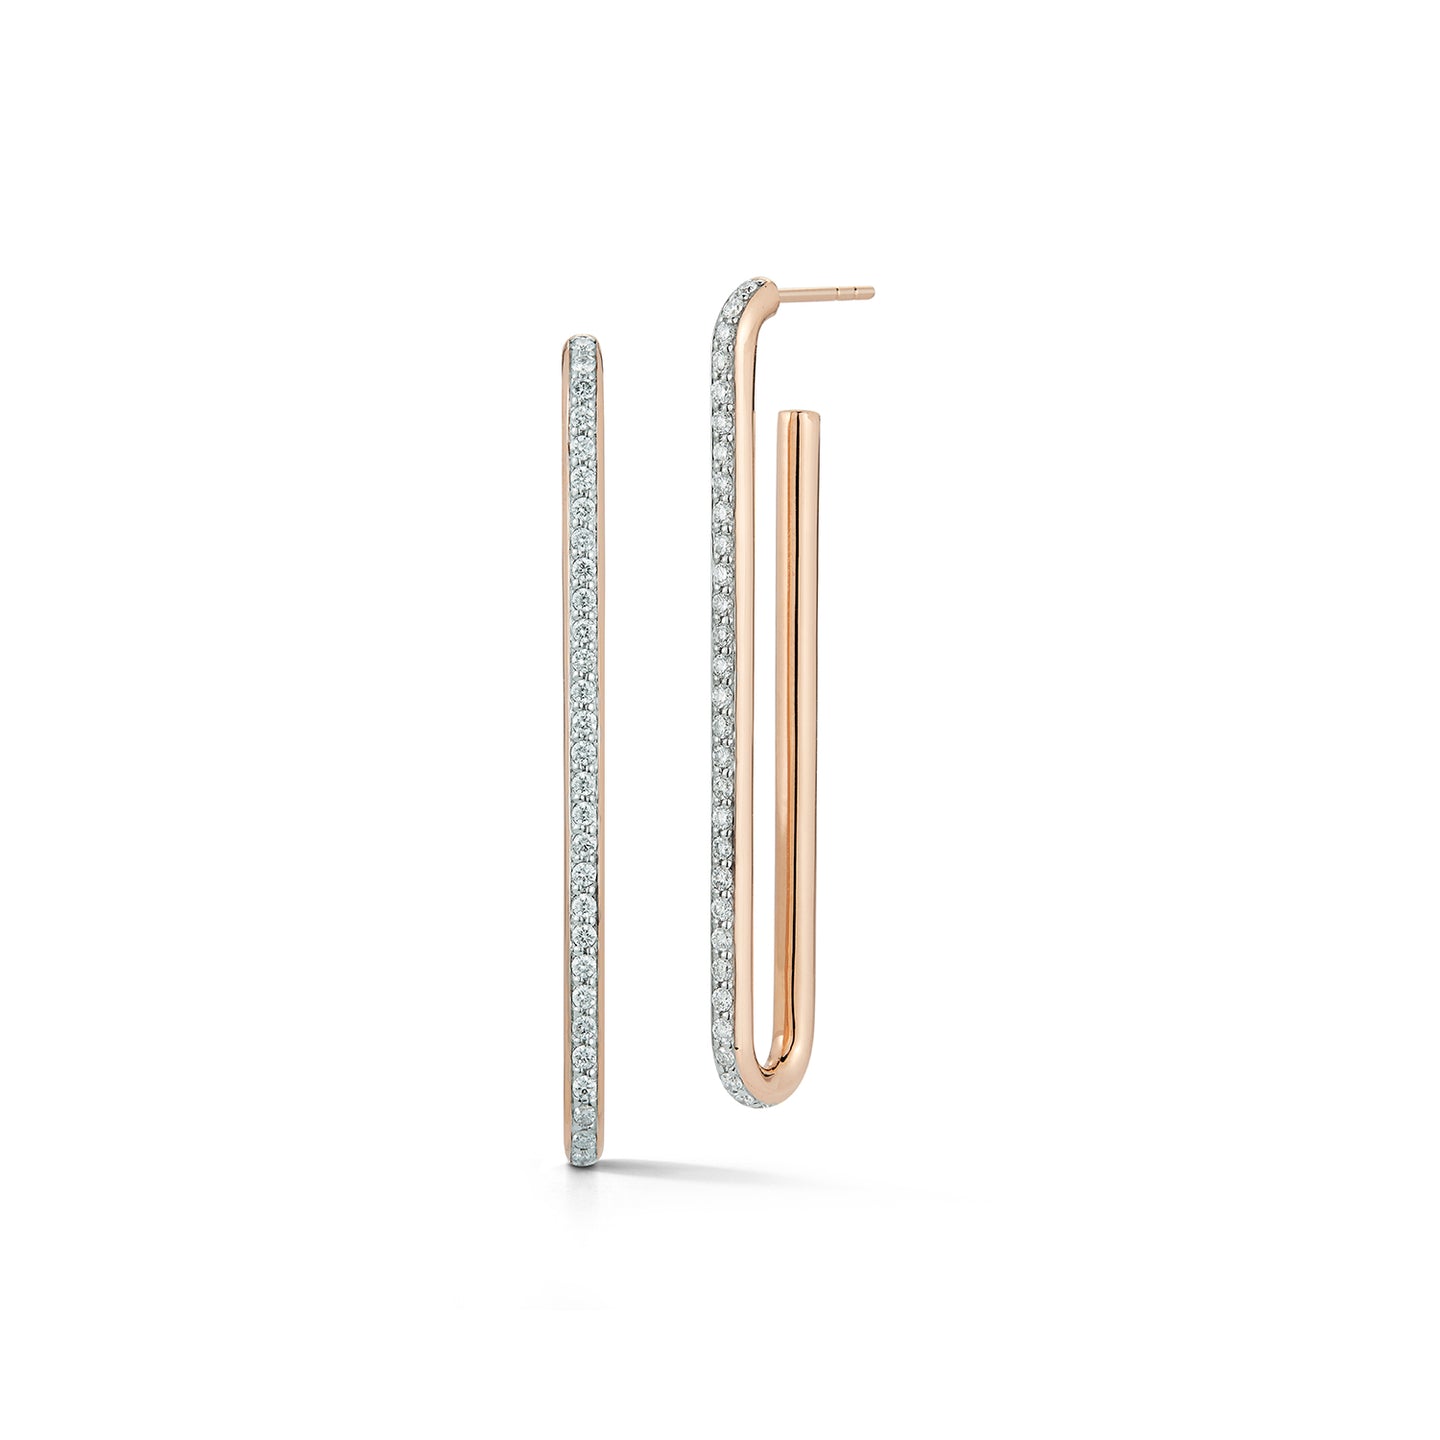 SAXON 18K ROSE GOLD AND DIAMOND EXTRA LONG SINGLE CHAIN LINK EARRINGS